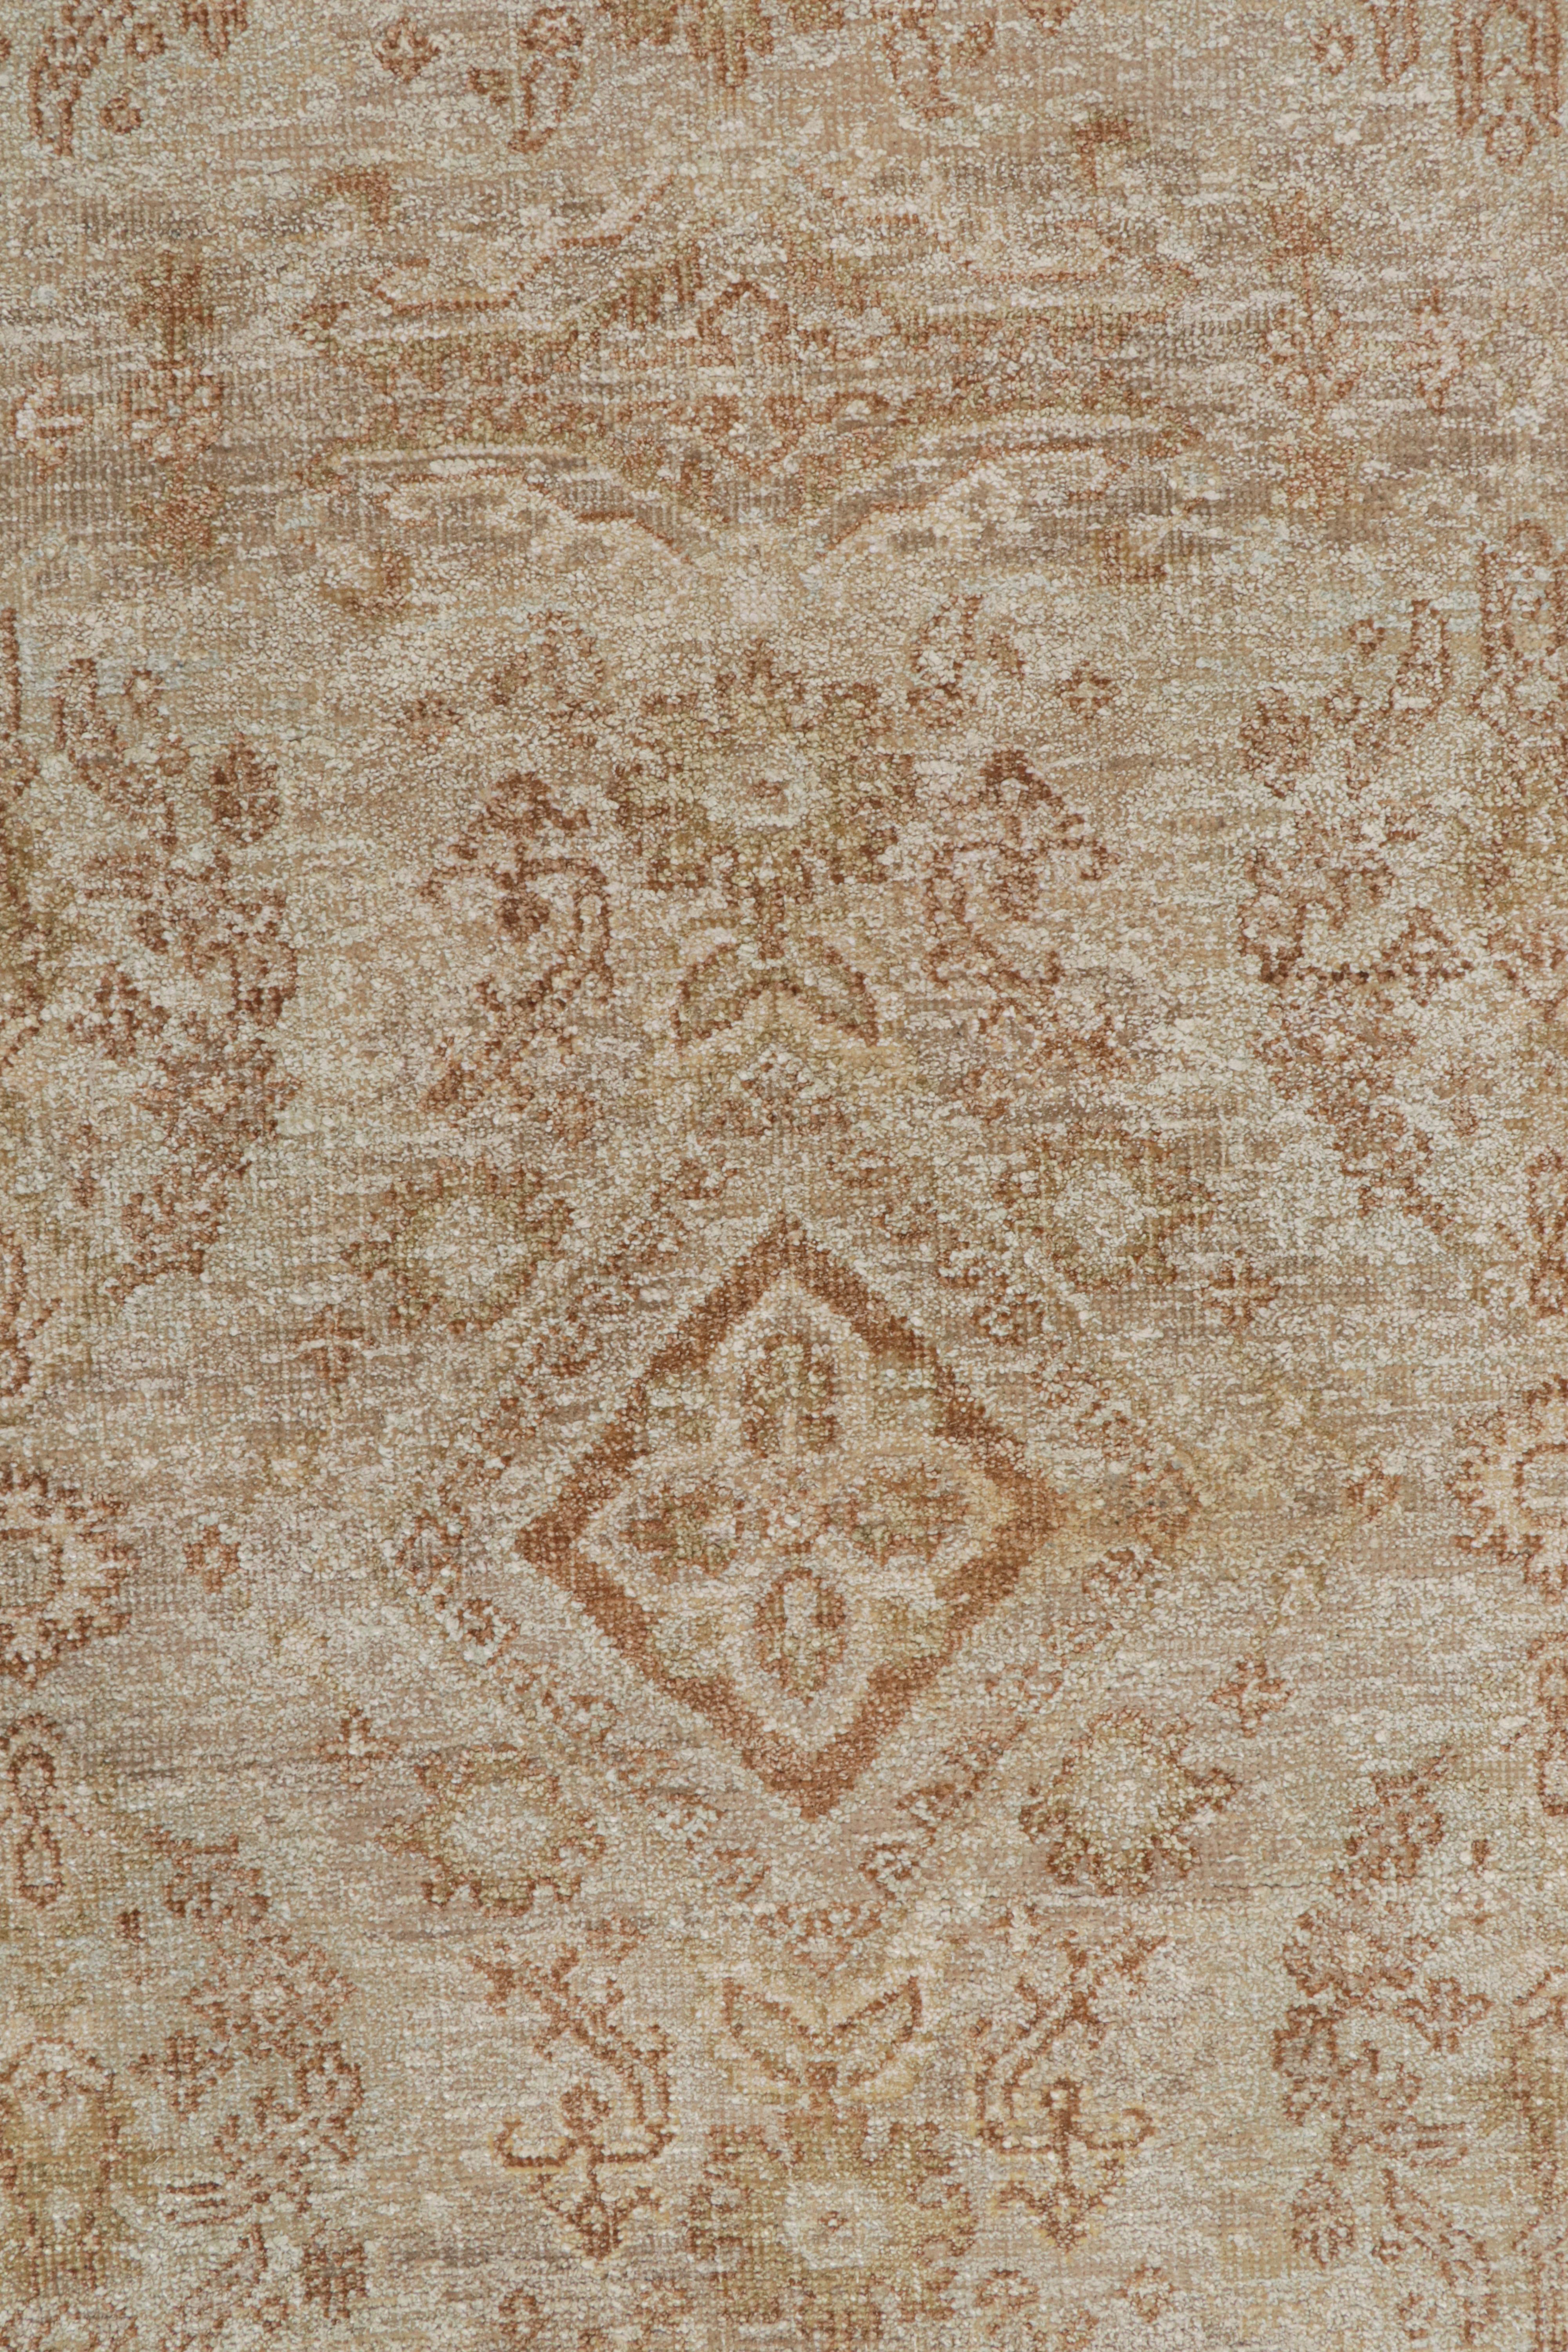 Contemporary Rug & Kilim’s Oushak Style Rug in Beige-Brown & White Geometric Patterns For Sale